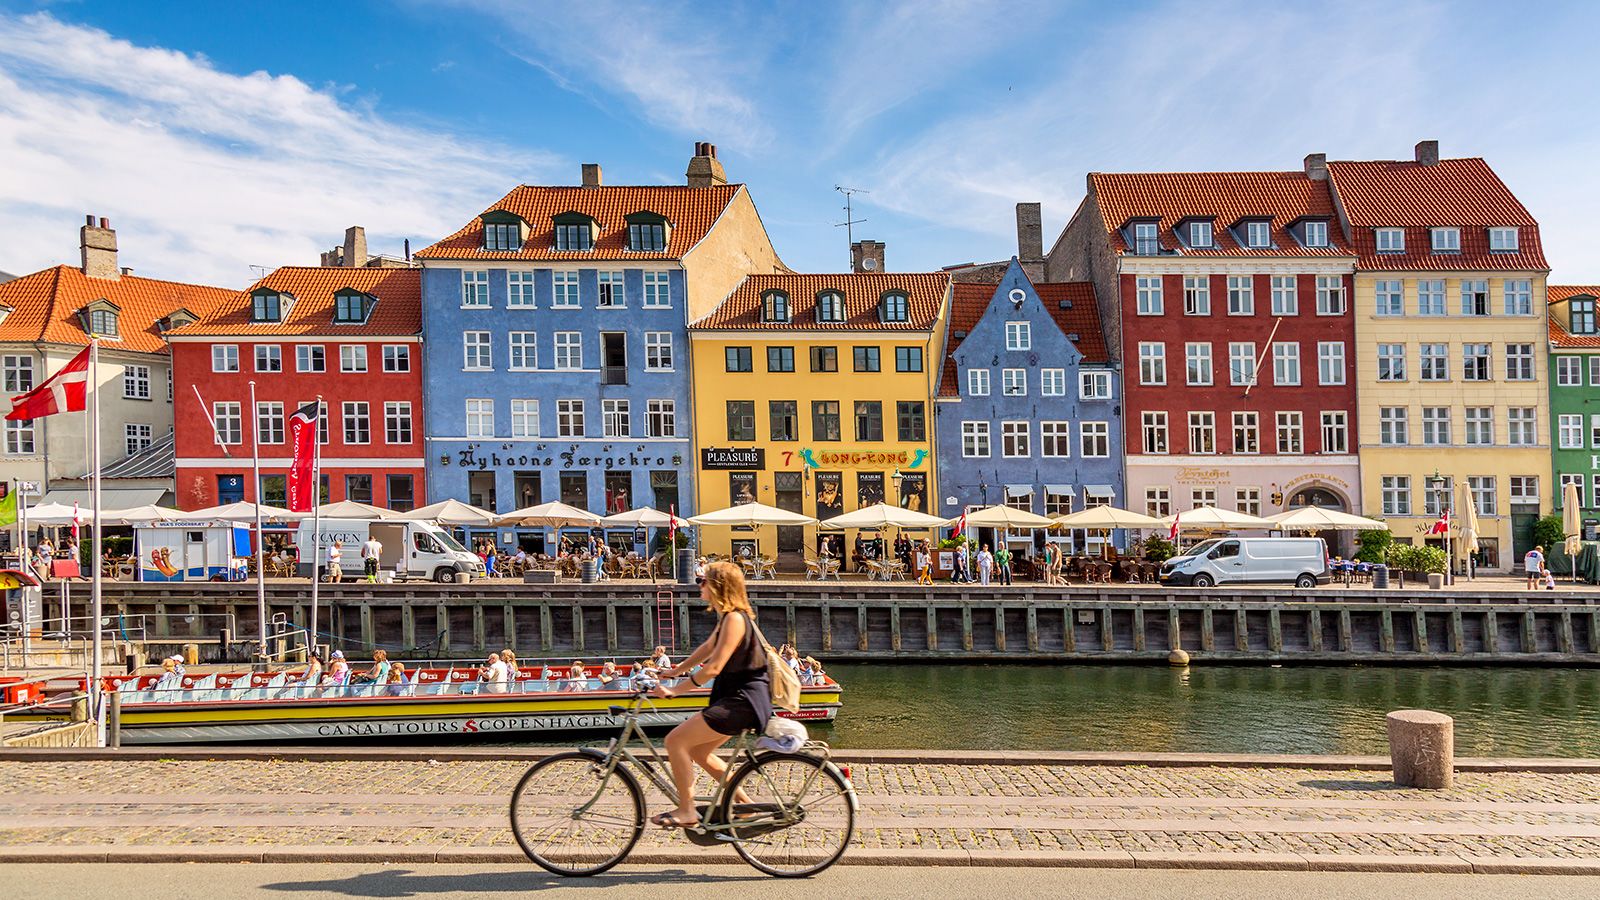 Aangepaste kans Geschatte 10 of the best cities in the world to see while riding a bicycle | CNN